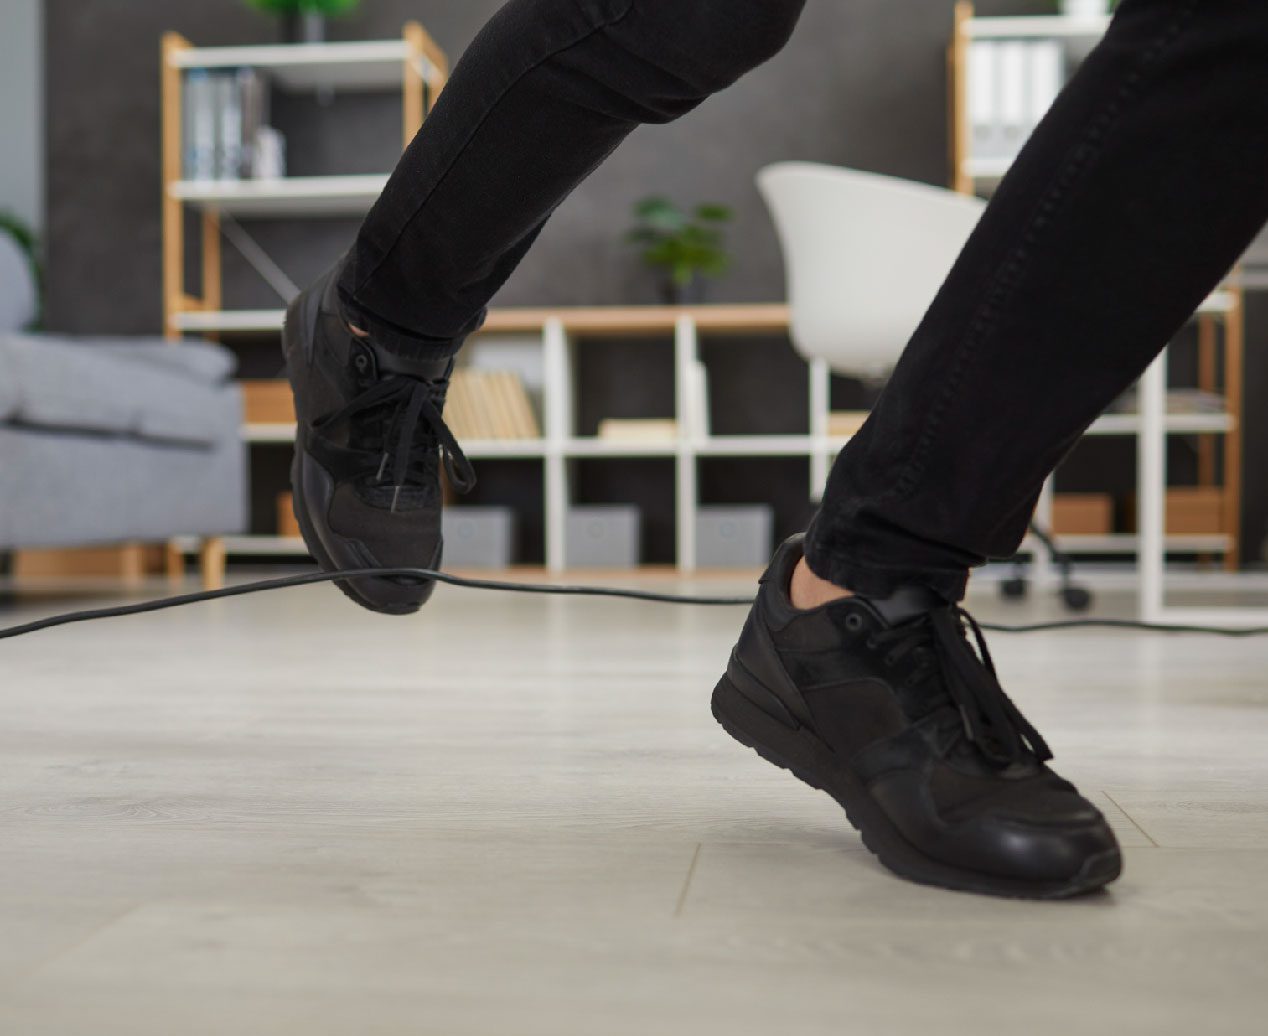 Identifying the Common Causes and Liability in Slip and Fall Incidents